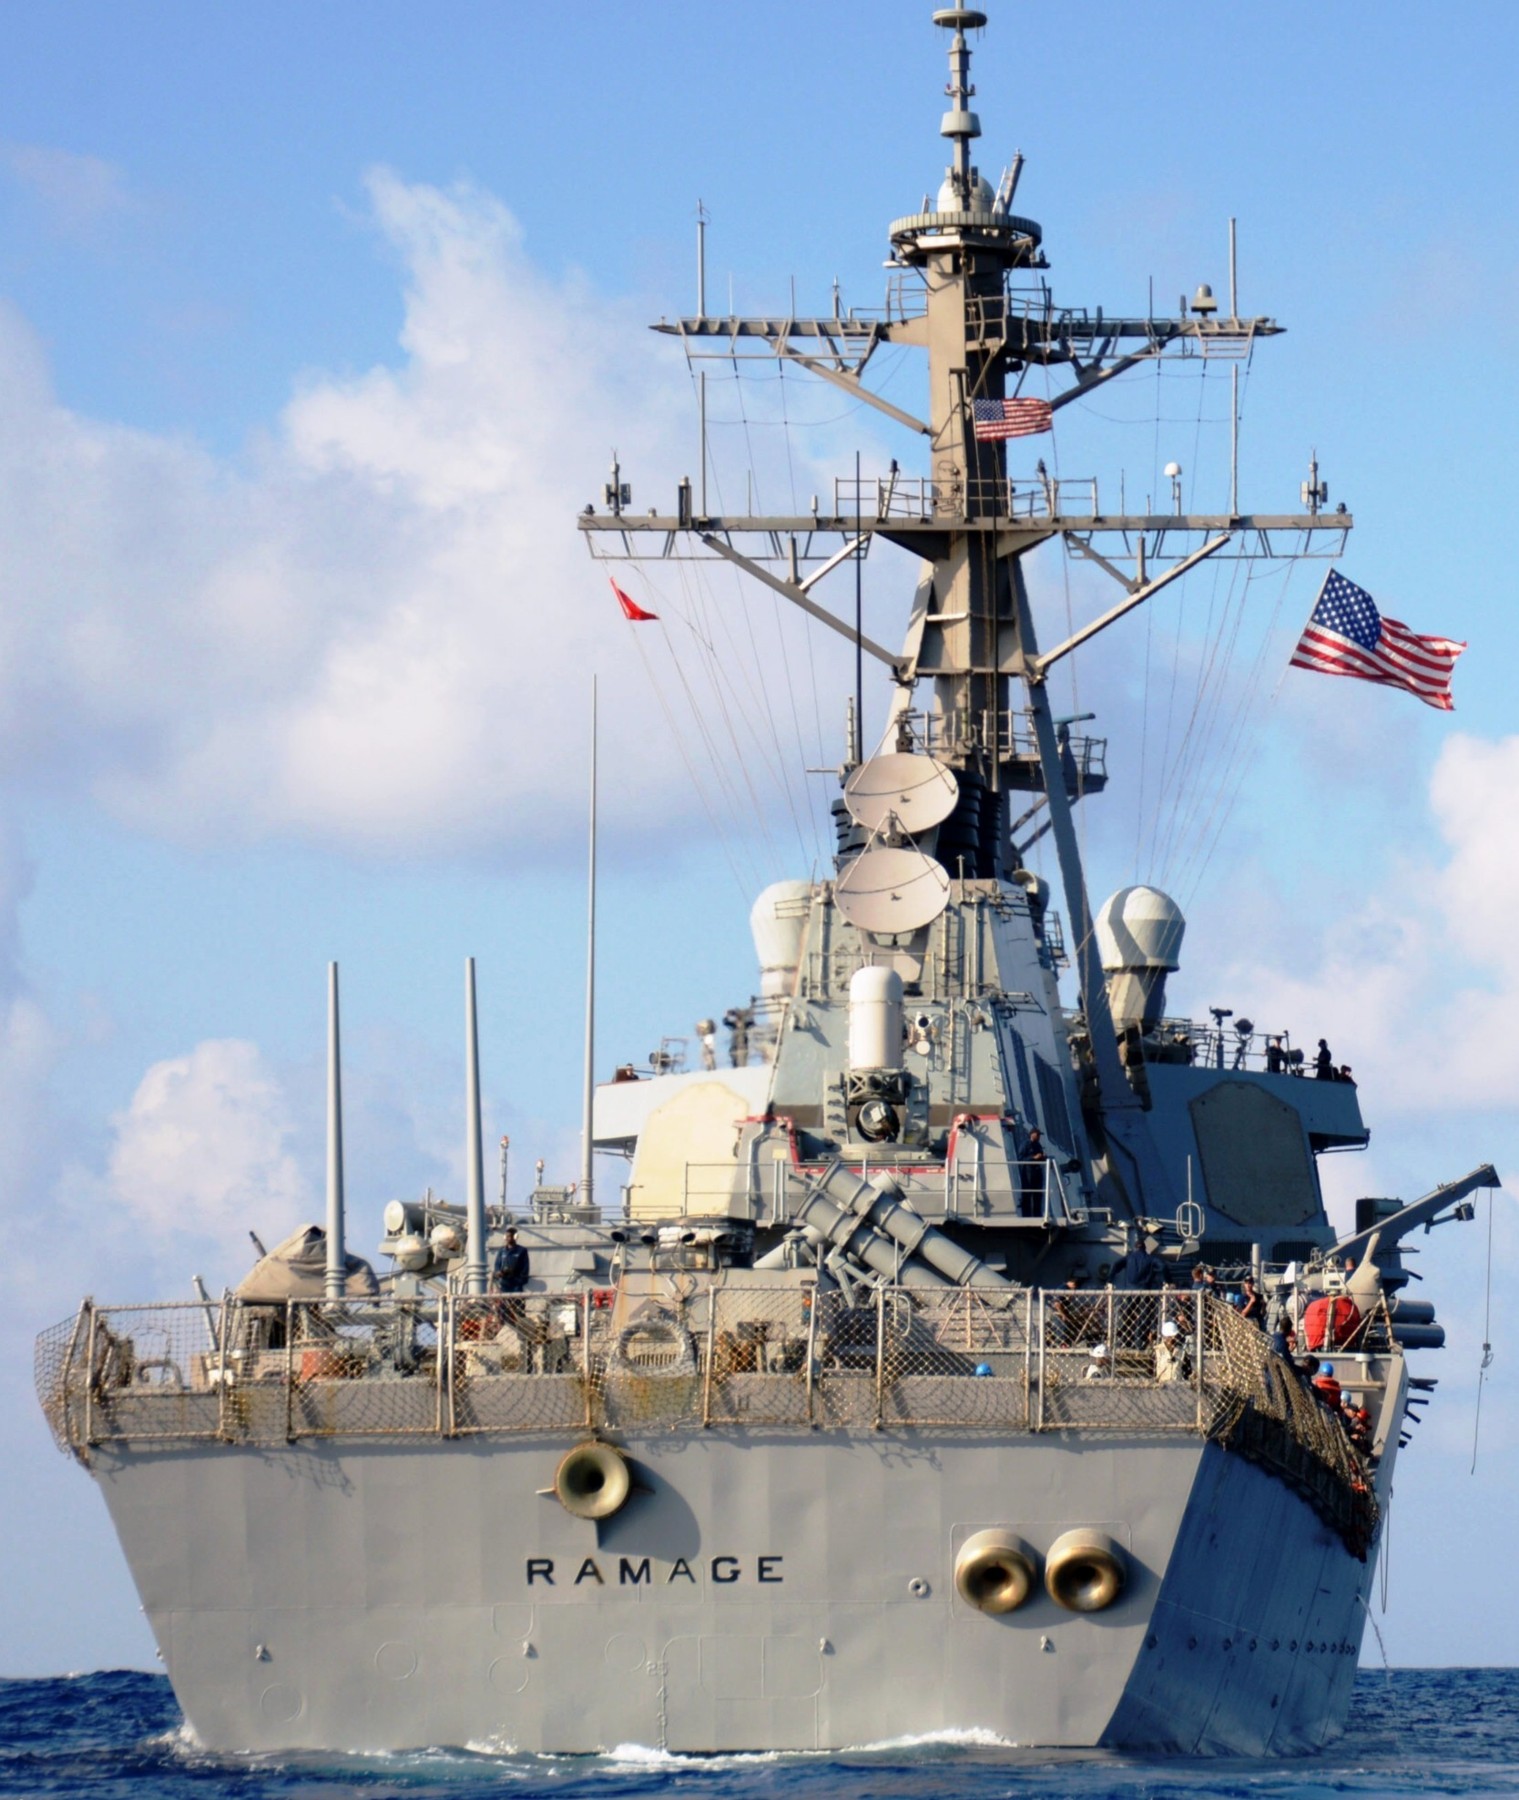 ddg-61 uss ramage guided missile destroyer arleigh burke class aegis us navy 78